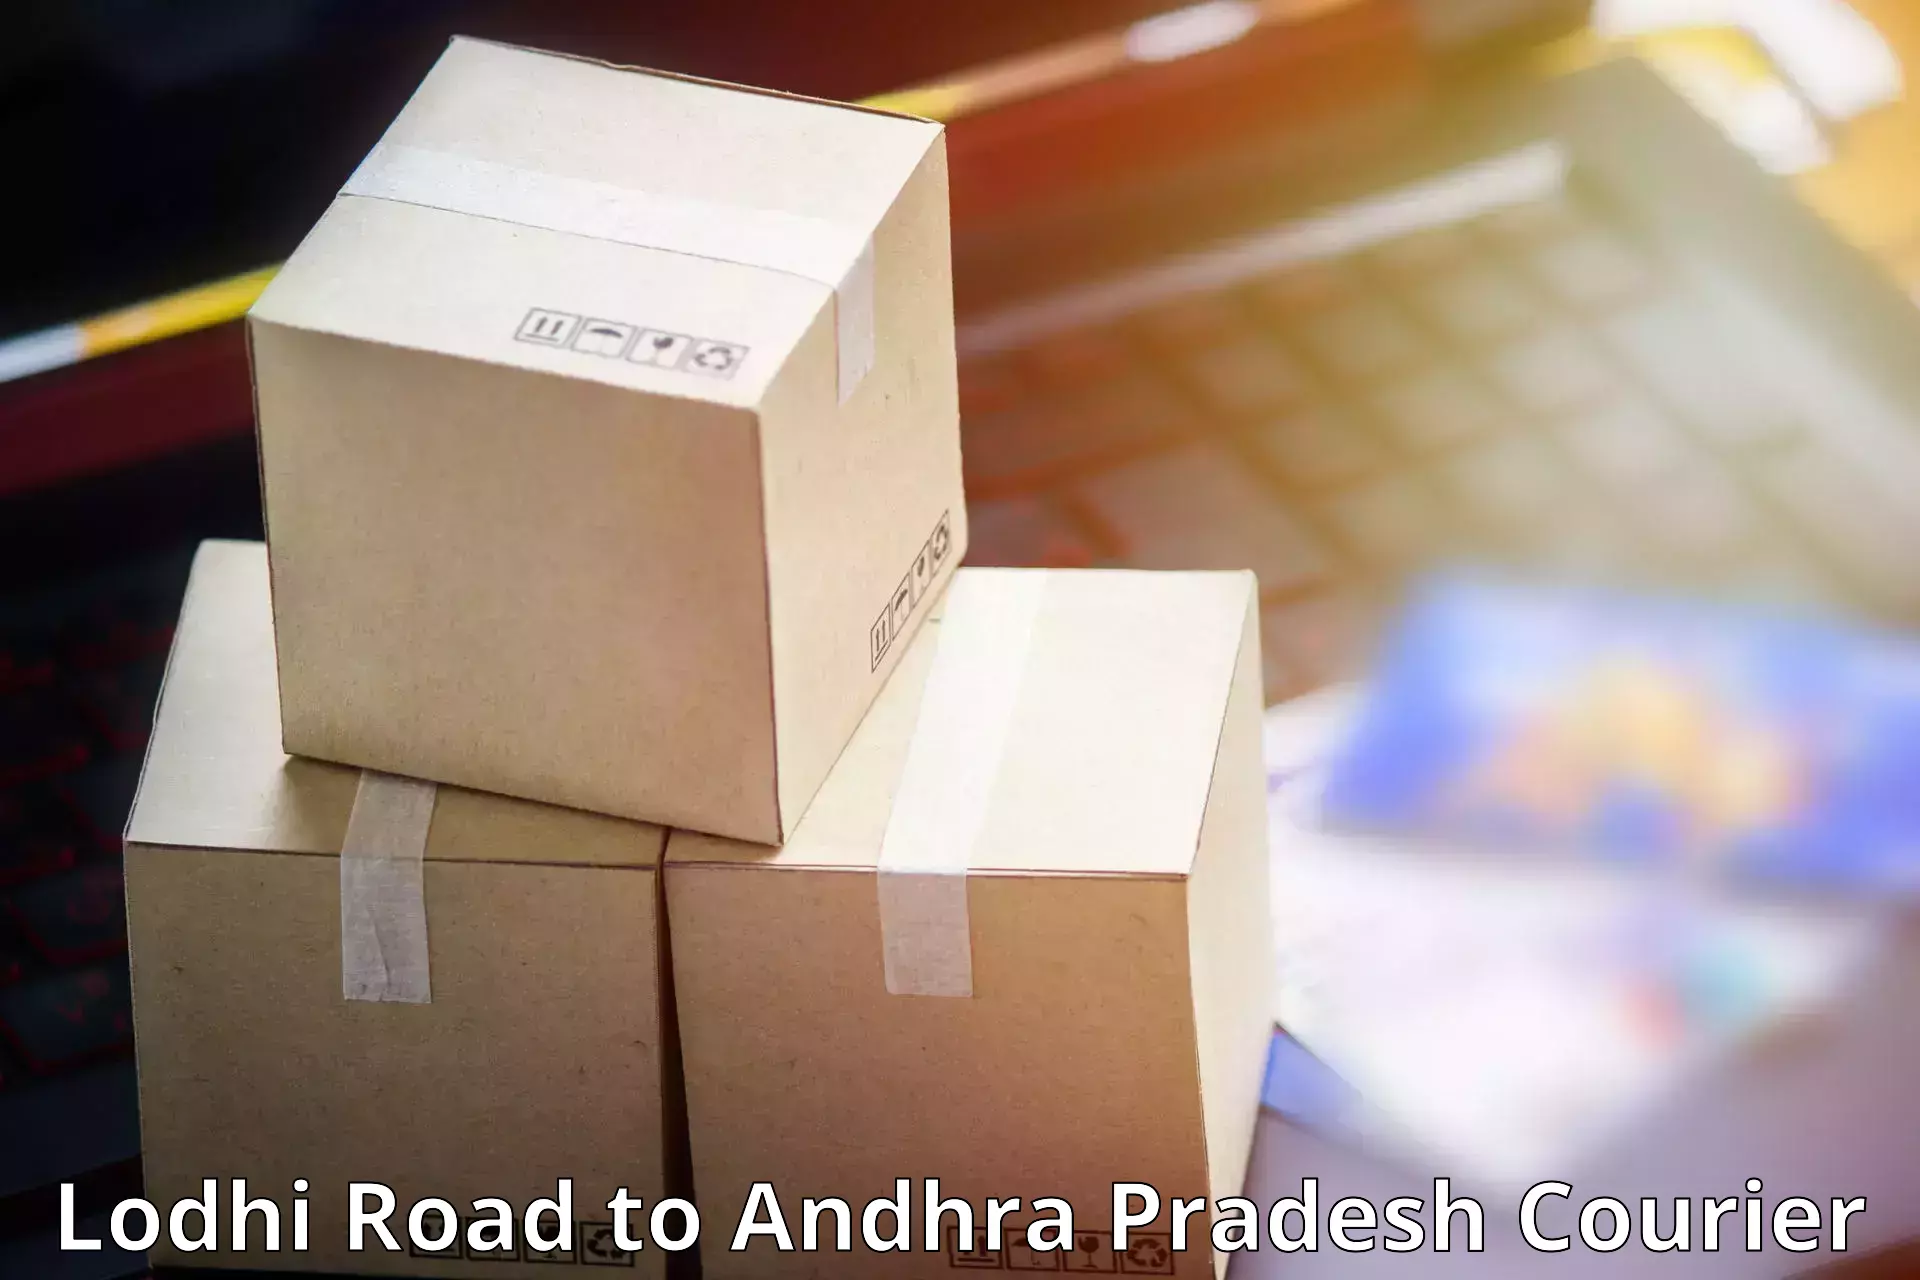 Courier insurance in Lodhi Road to Pedabayalu